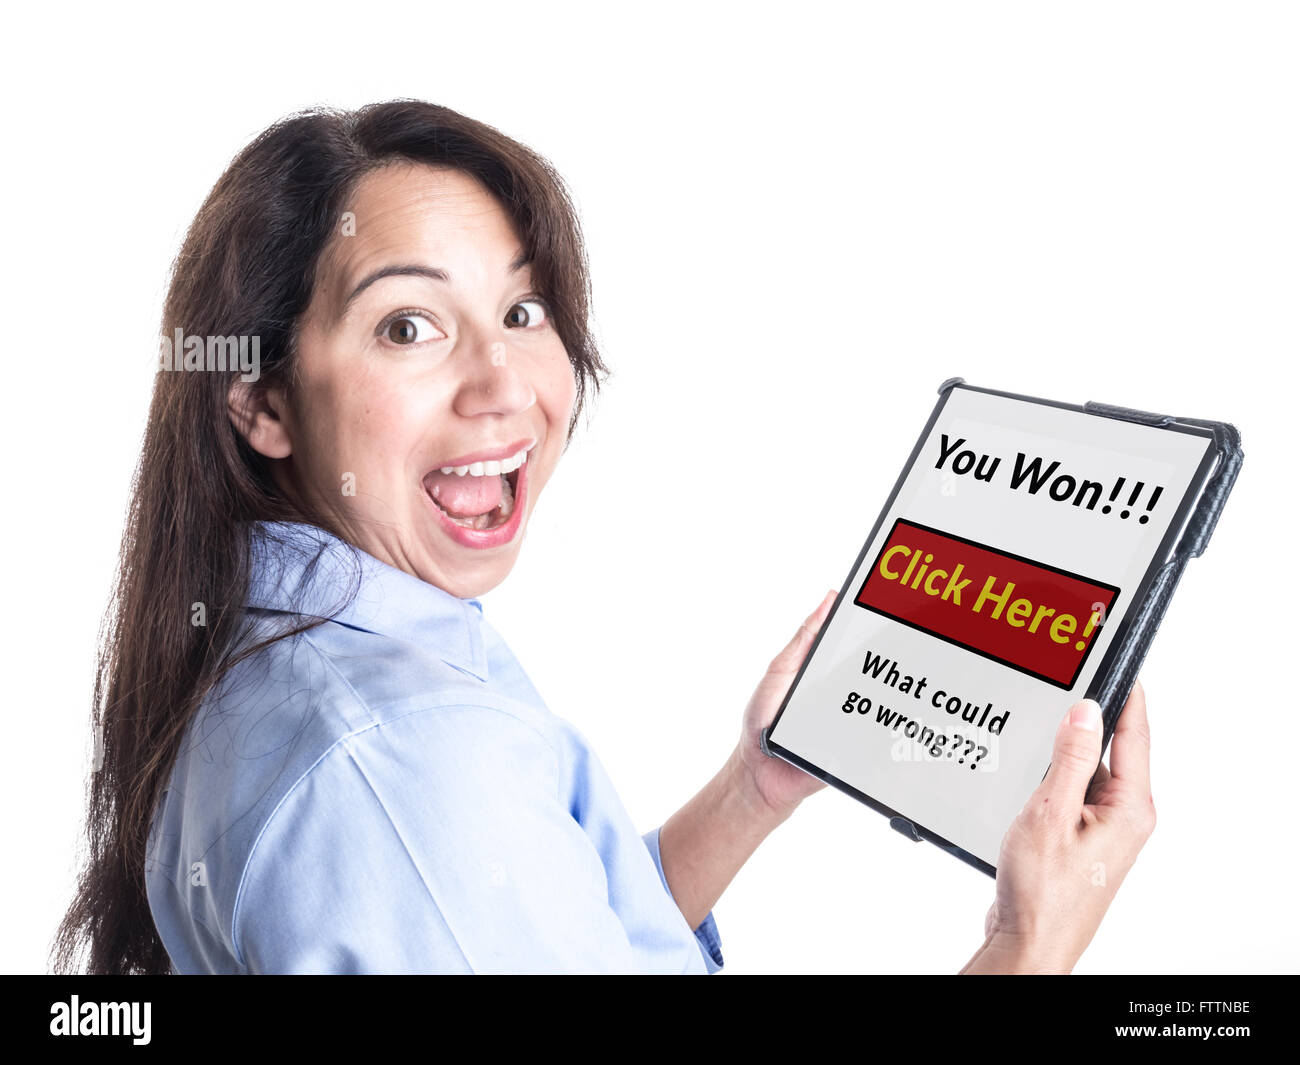 A young woman is overjoyed by message on her tablet computer stating she has won a prize, not realizing it is a scam. Stock Photo